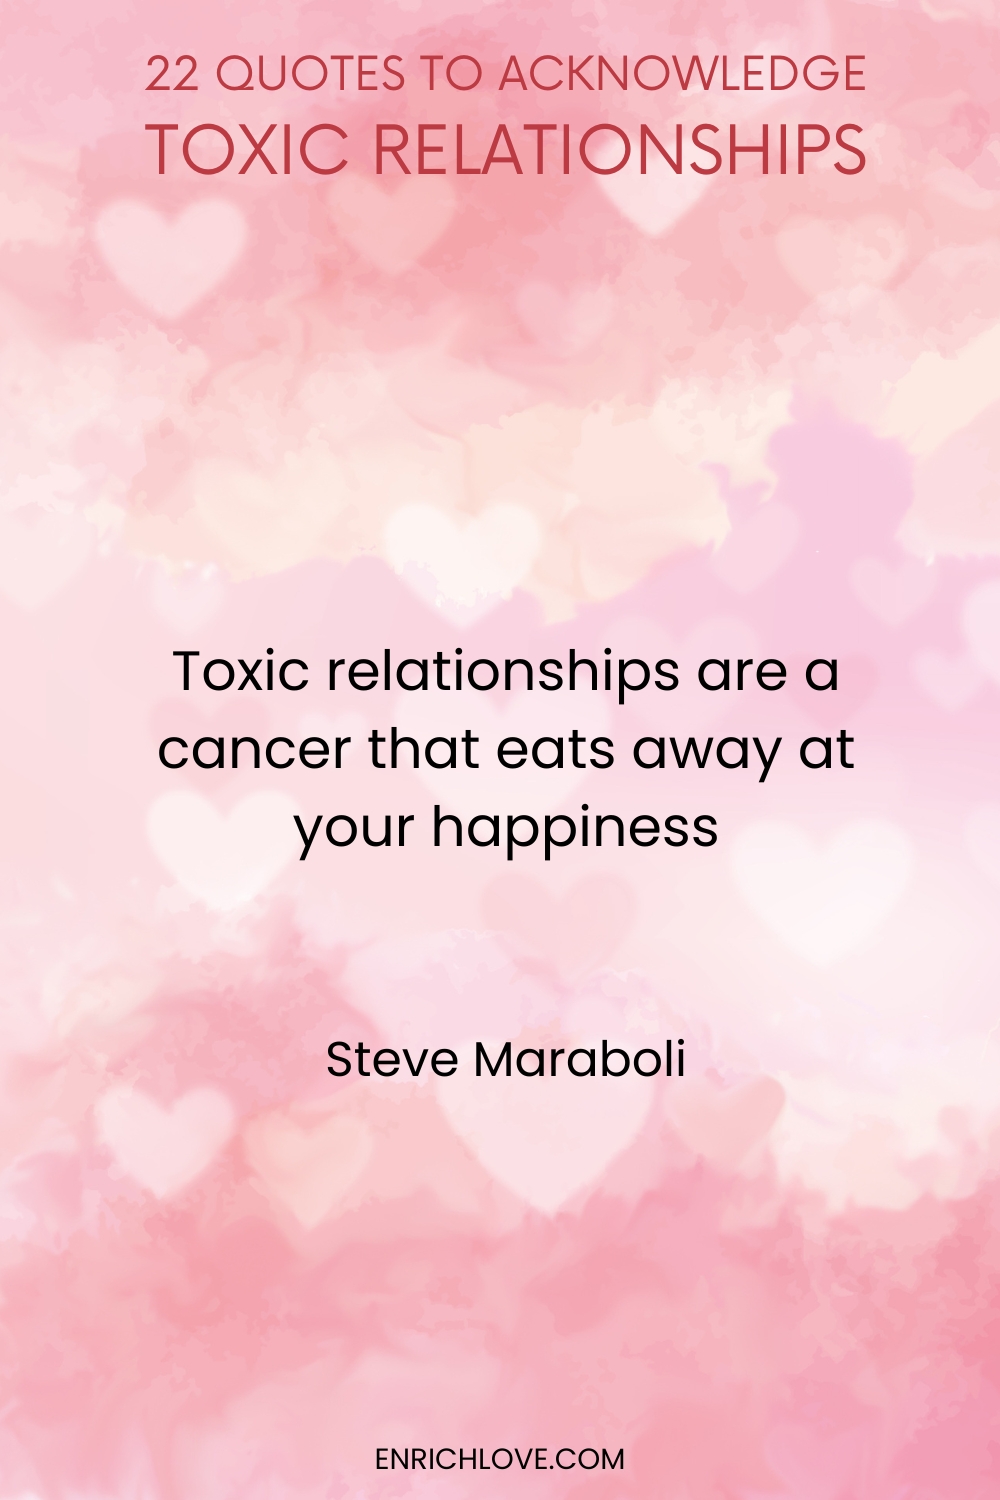 22 Quotes to Acknowledge Toxic Relationships -Toxic relationships are a cancer that eats away at your happiness by Steve Maraboli